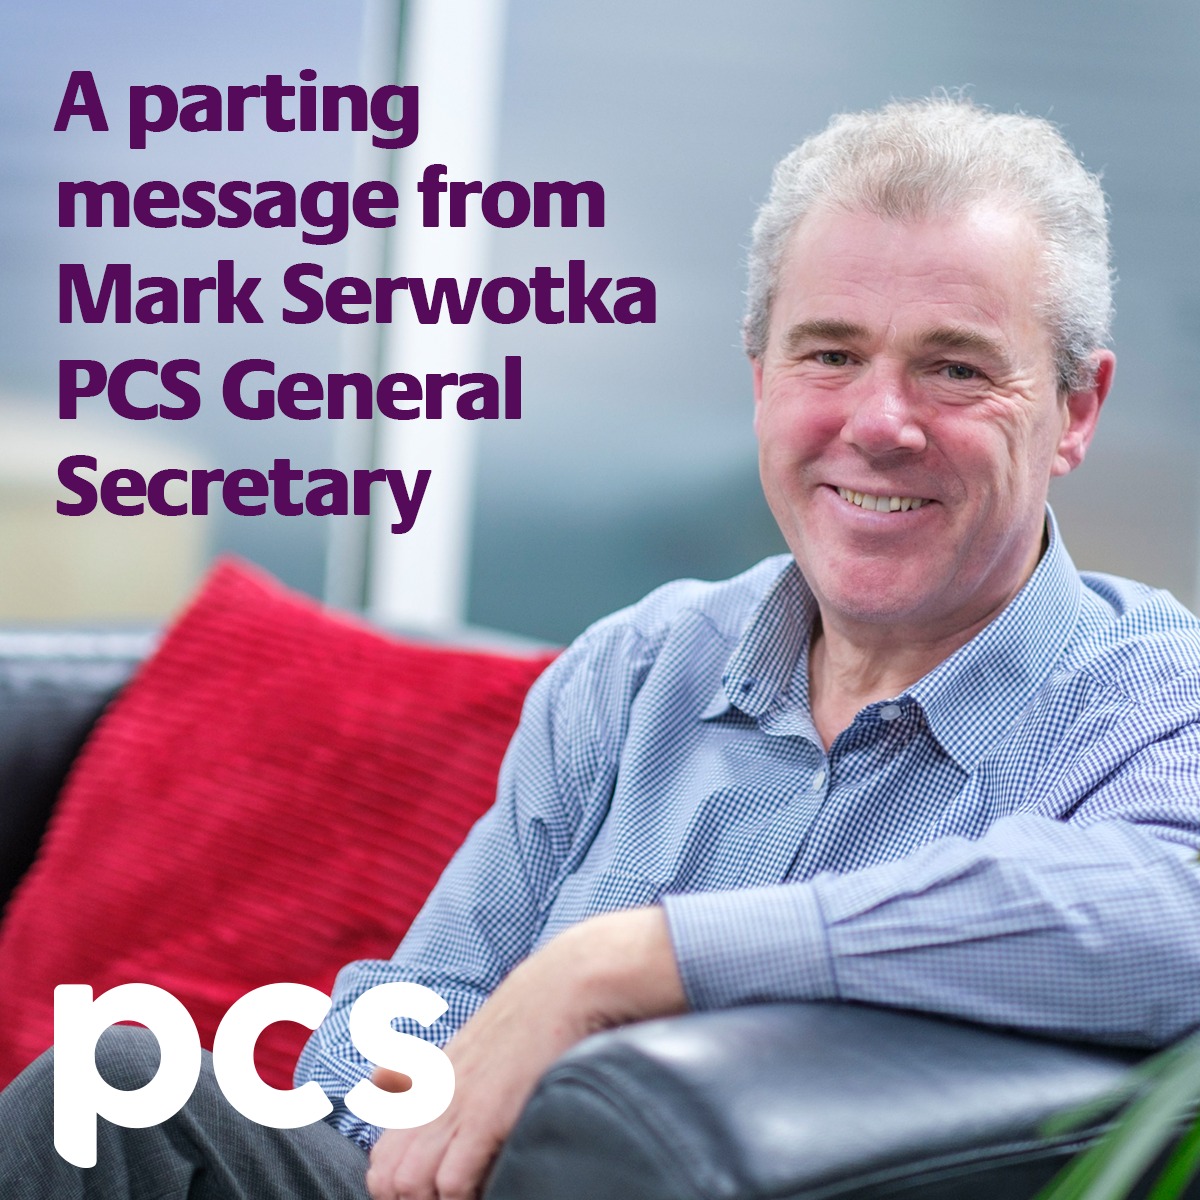 ✊ 'I retire today after 23 years as general secretary in the knowledge that, working with PCS reps at all levels and our dedicated PCS staff, we have built PCS into a campaigning, fighting union.' Read Mark's full message: pcs.org.uk/news-events/ne… #PCS #MarkSerwotka